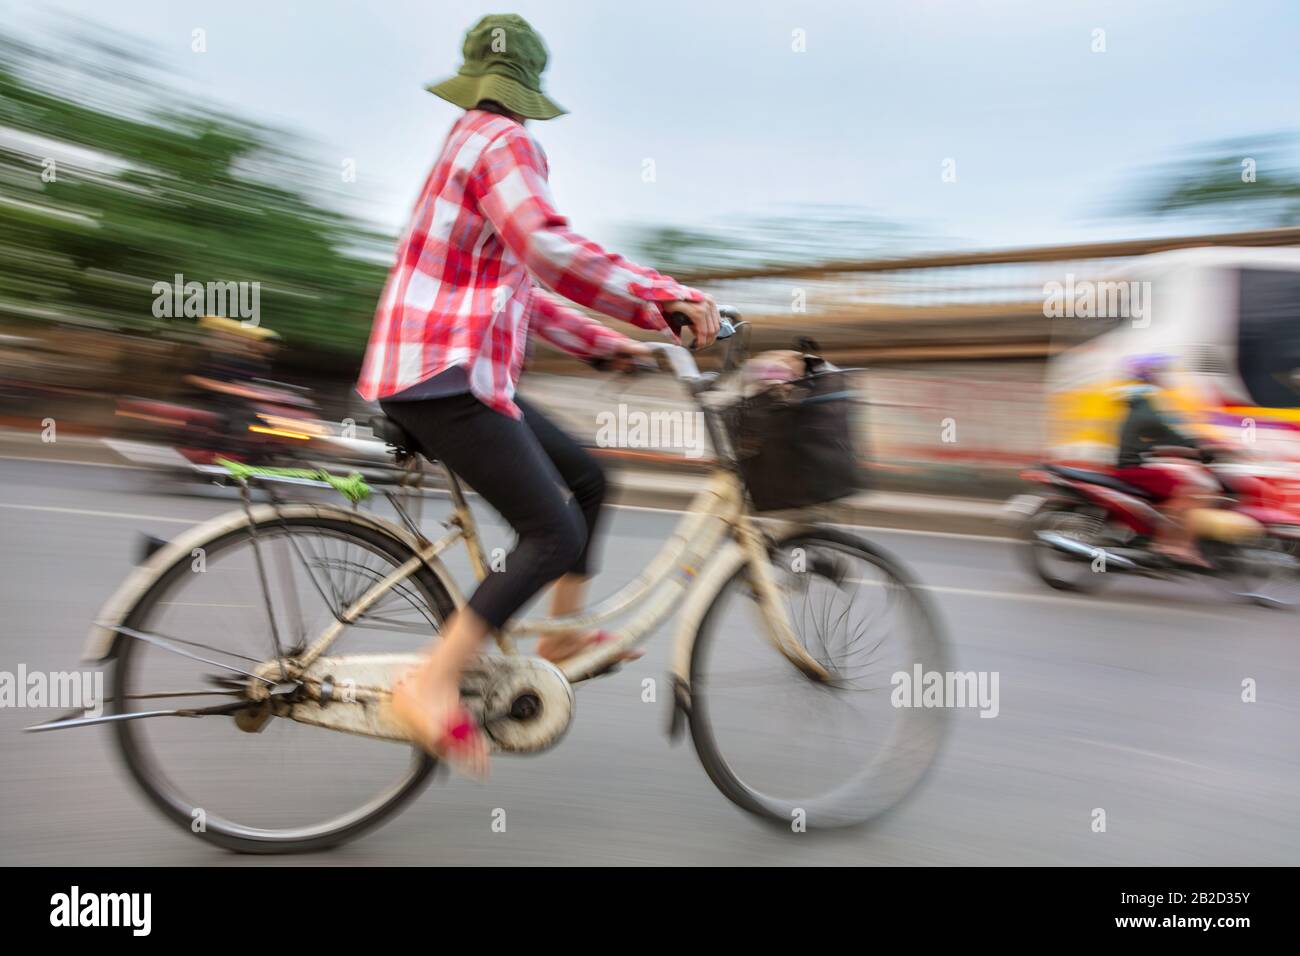 Motion blurred photograph of a Vietnamese woman on a bicycle Stock Photo